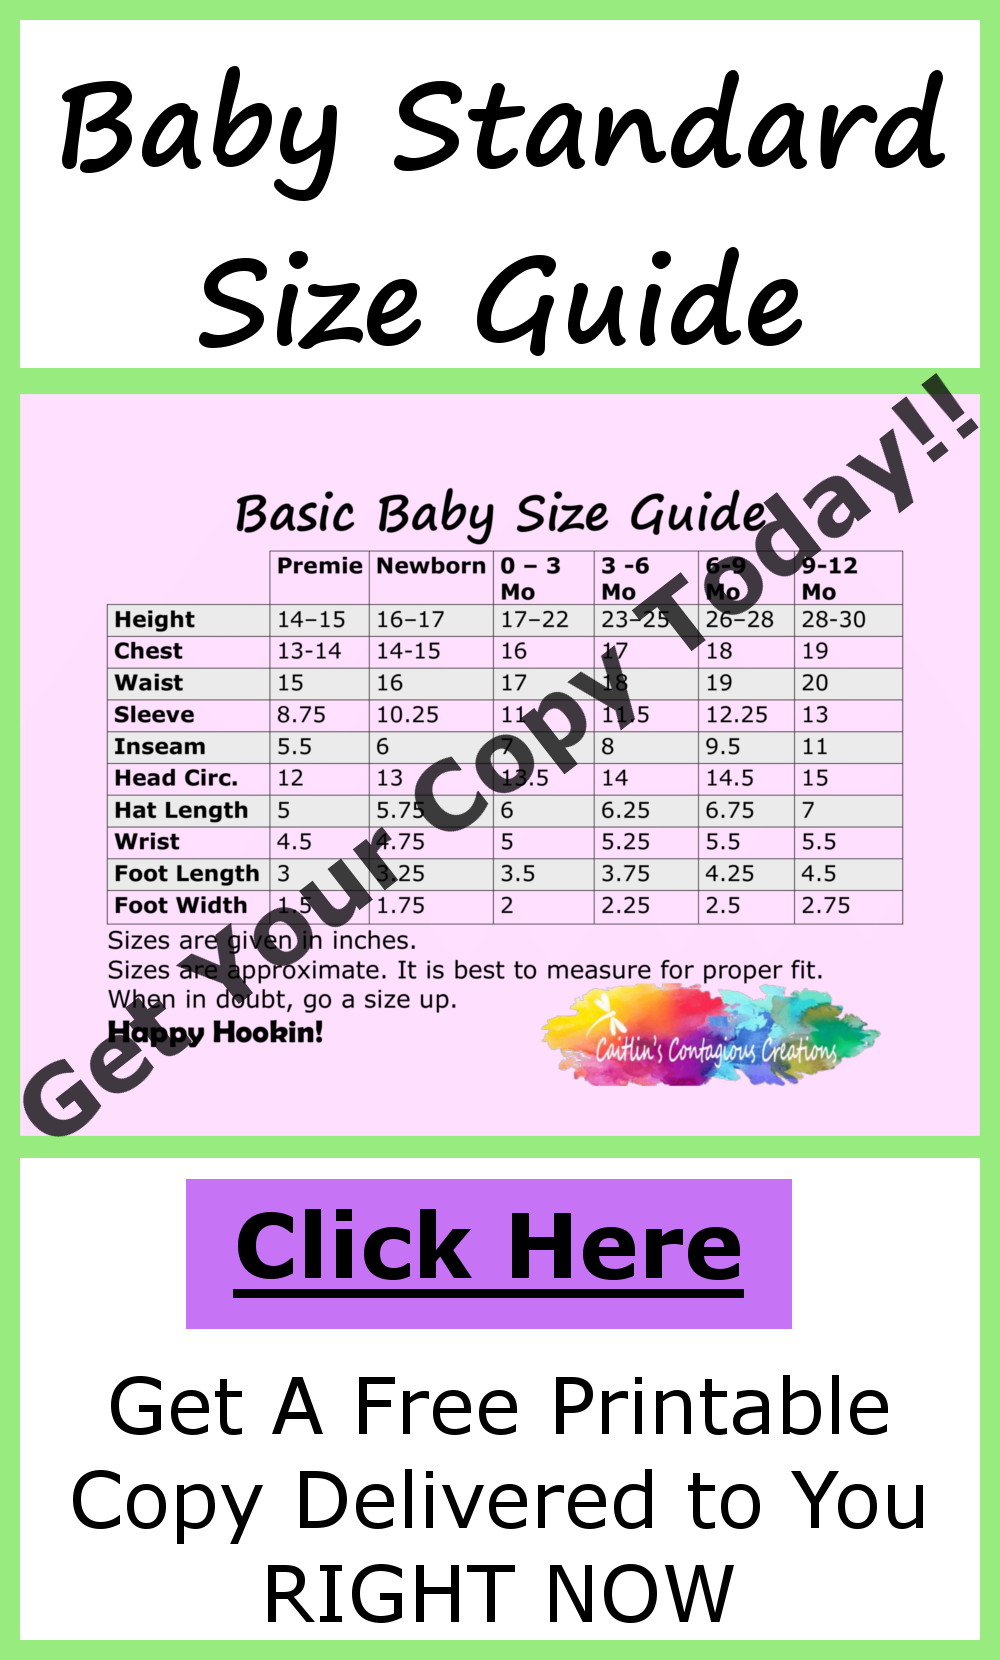 Baby Size Guide Opt-In PDF Printable example with text overlay